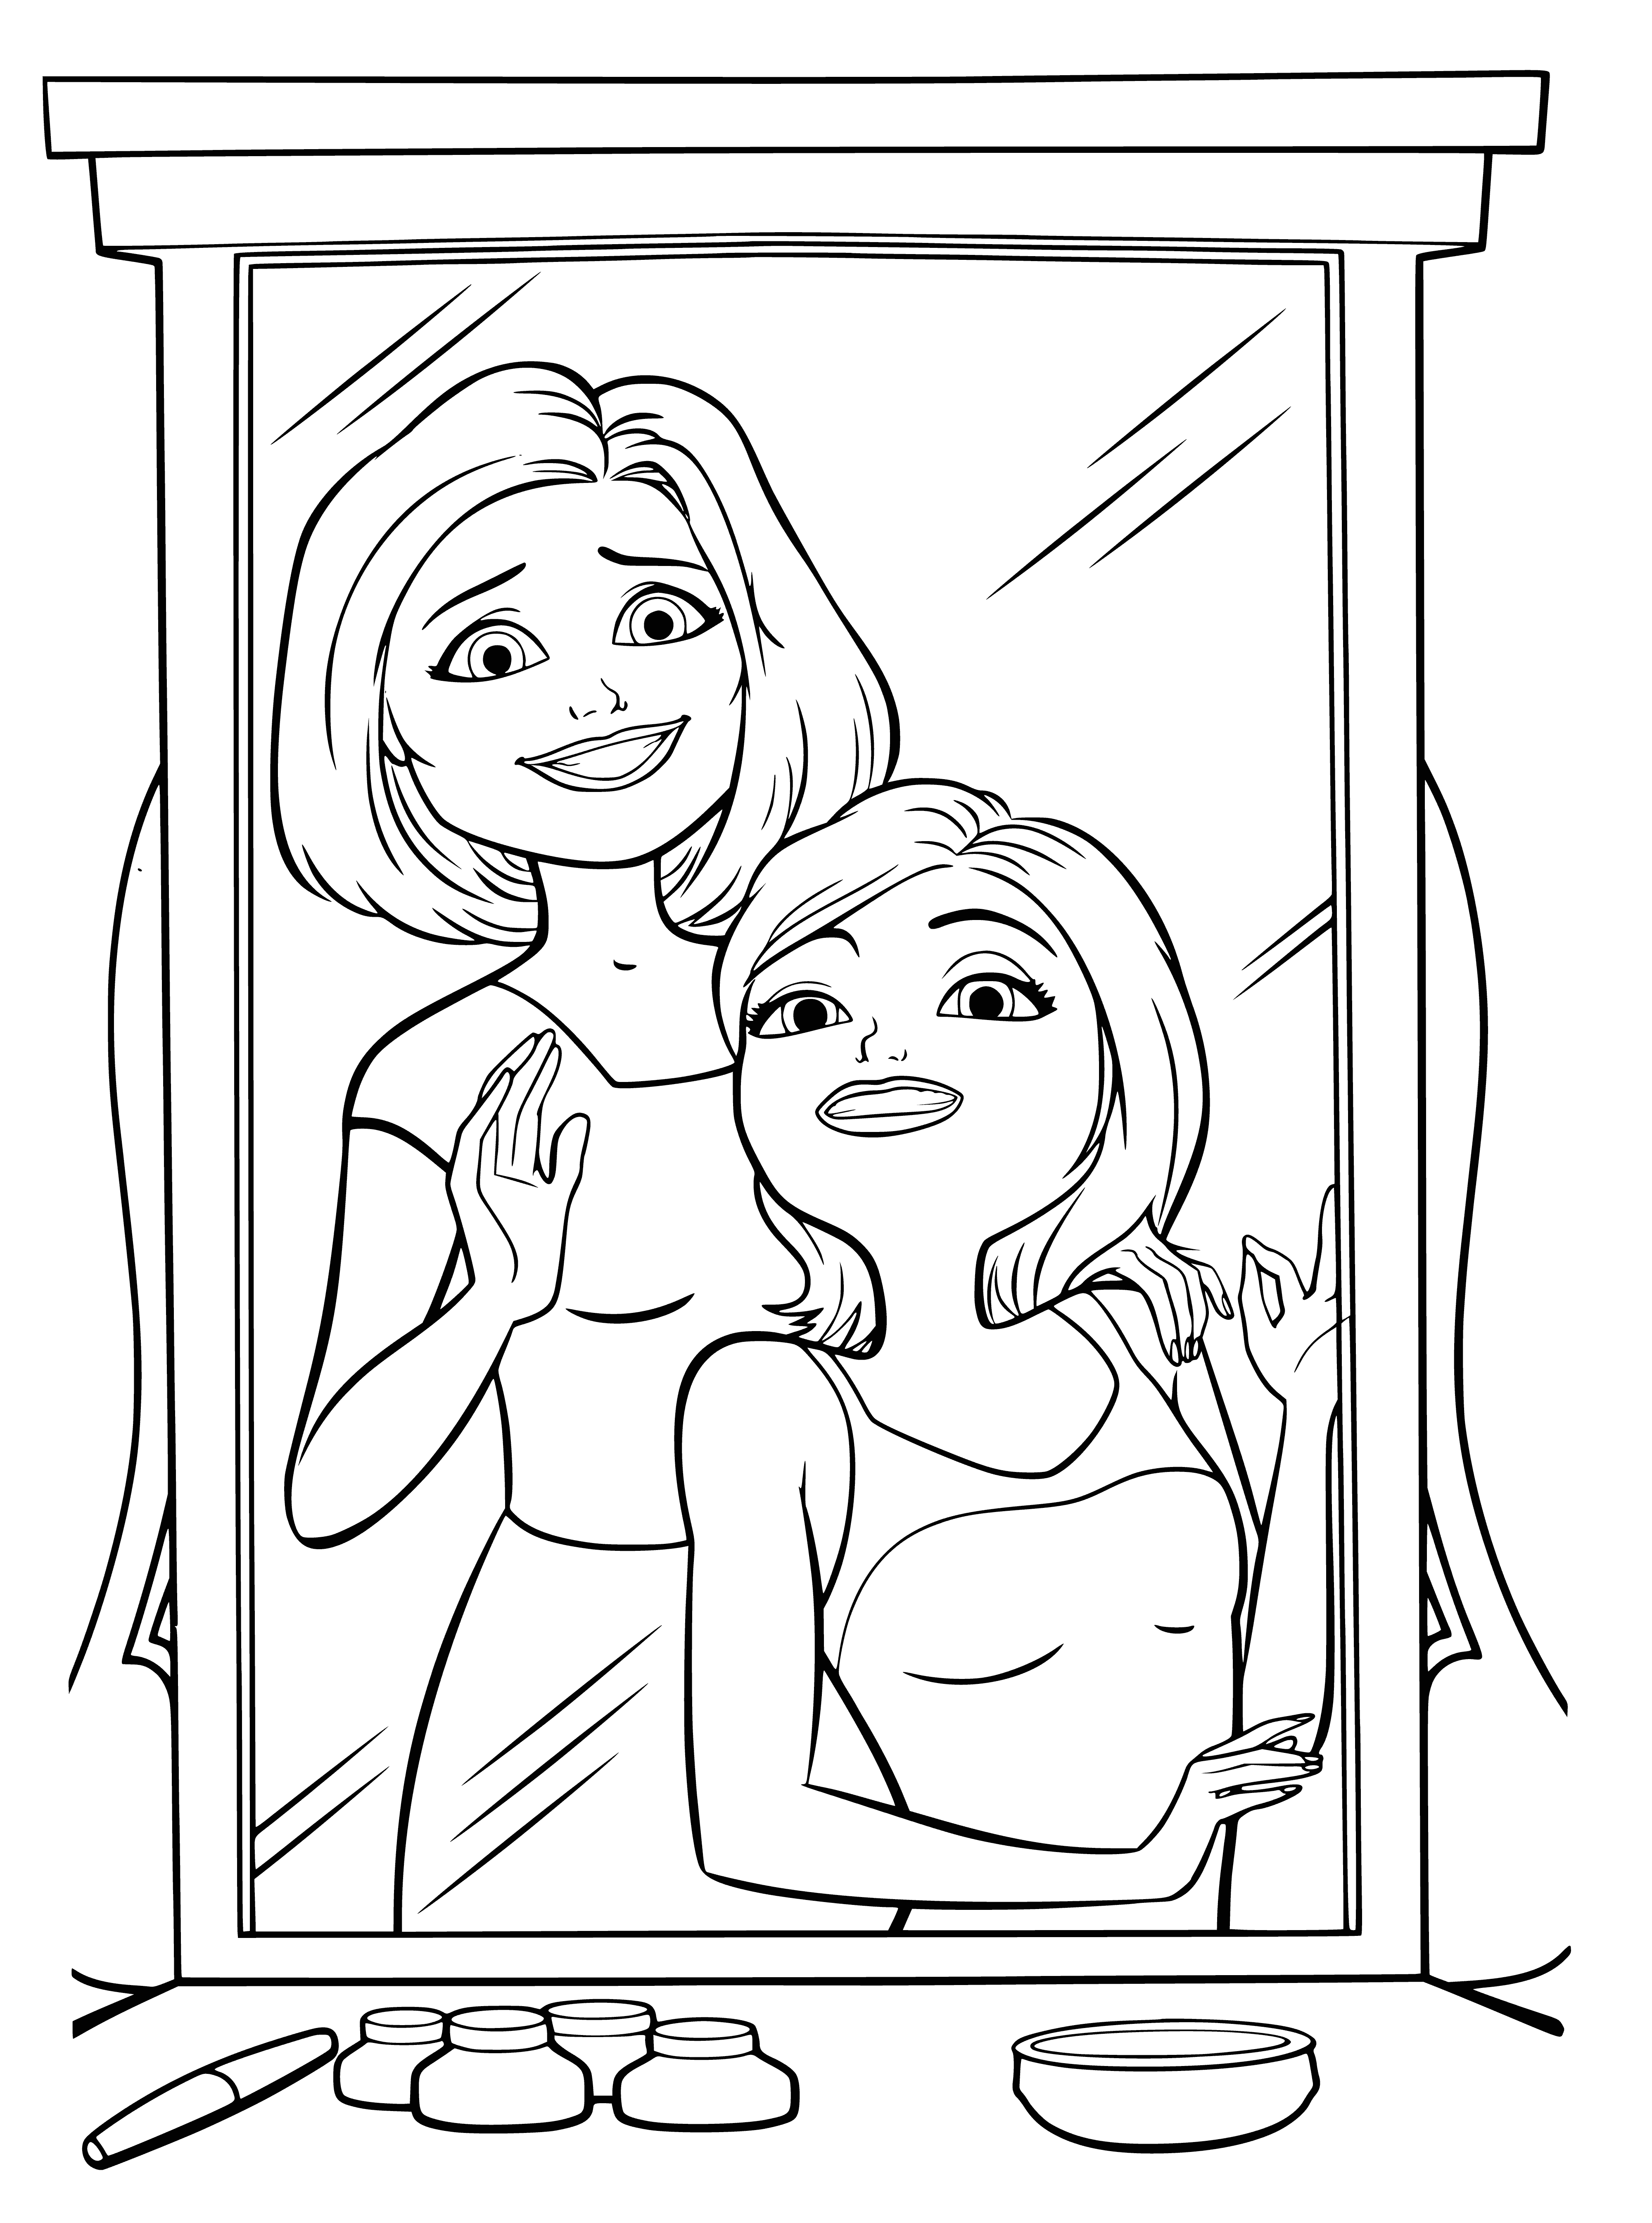 Mom and Susan coloring page